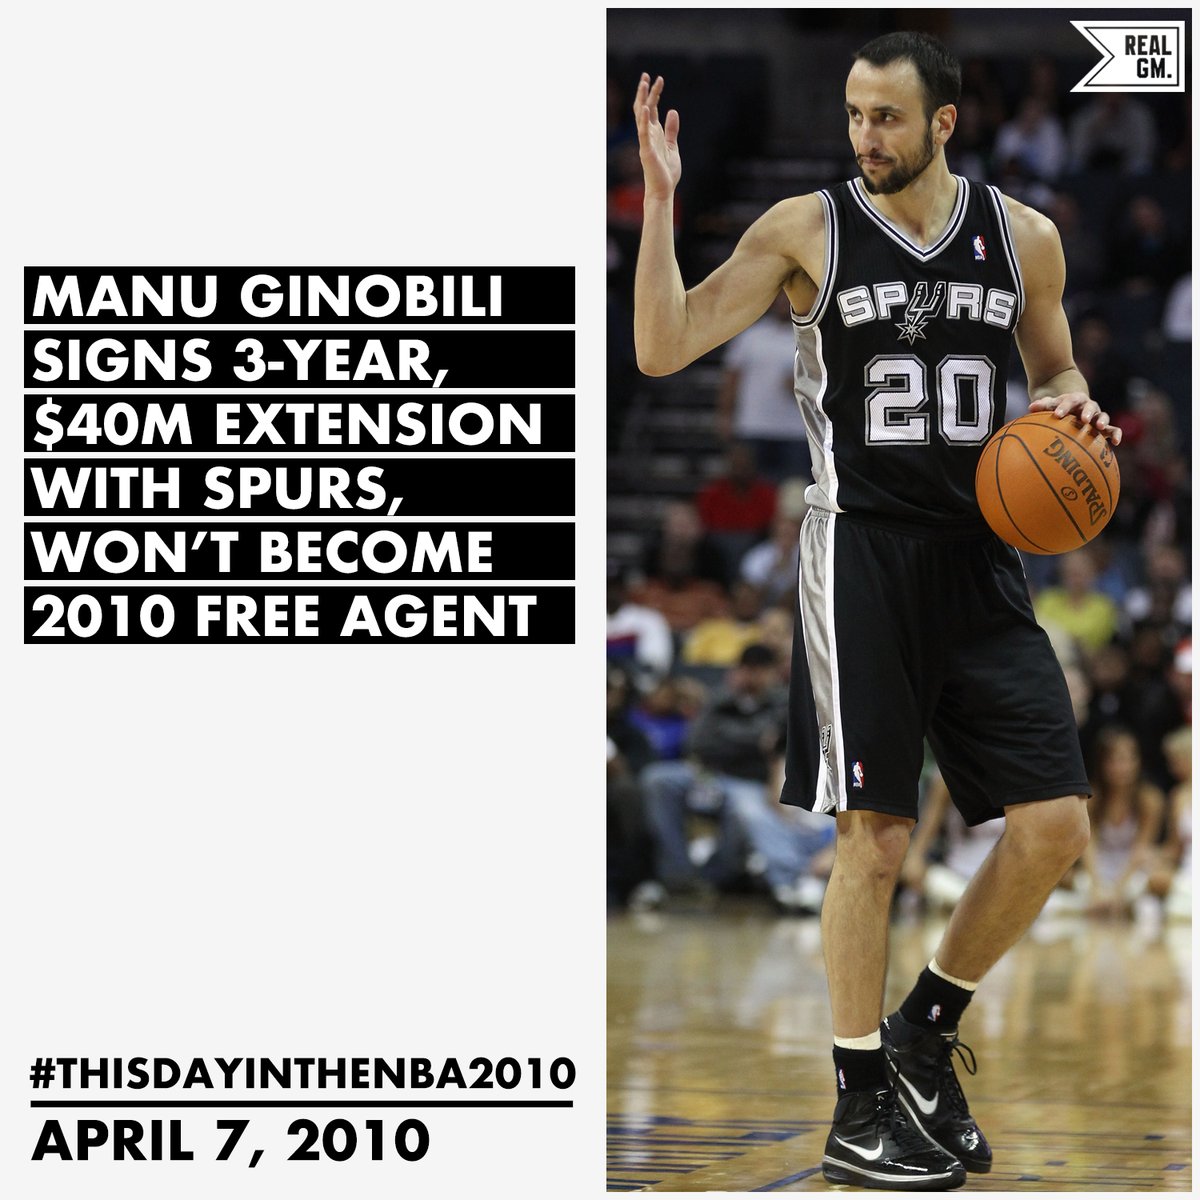  #ThisDayInTheNBA2010April 7, 2010Manu Ginobili Signs Three-Year, $40M Extension With Spurs, Won't Become 2010 Free Agent  https://basketball.realgm.com/wiretap/203144/Manu-Ginobili-Signs-Three-Year-$40M-Extension-With-Spurs-Wont-Become-2010-Free-Agent